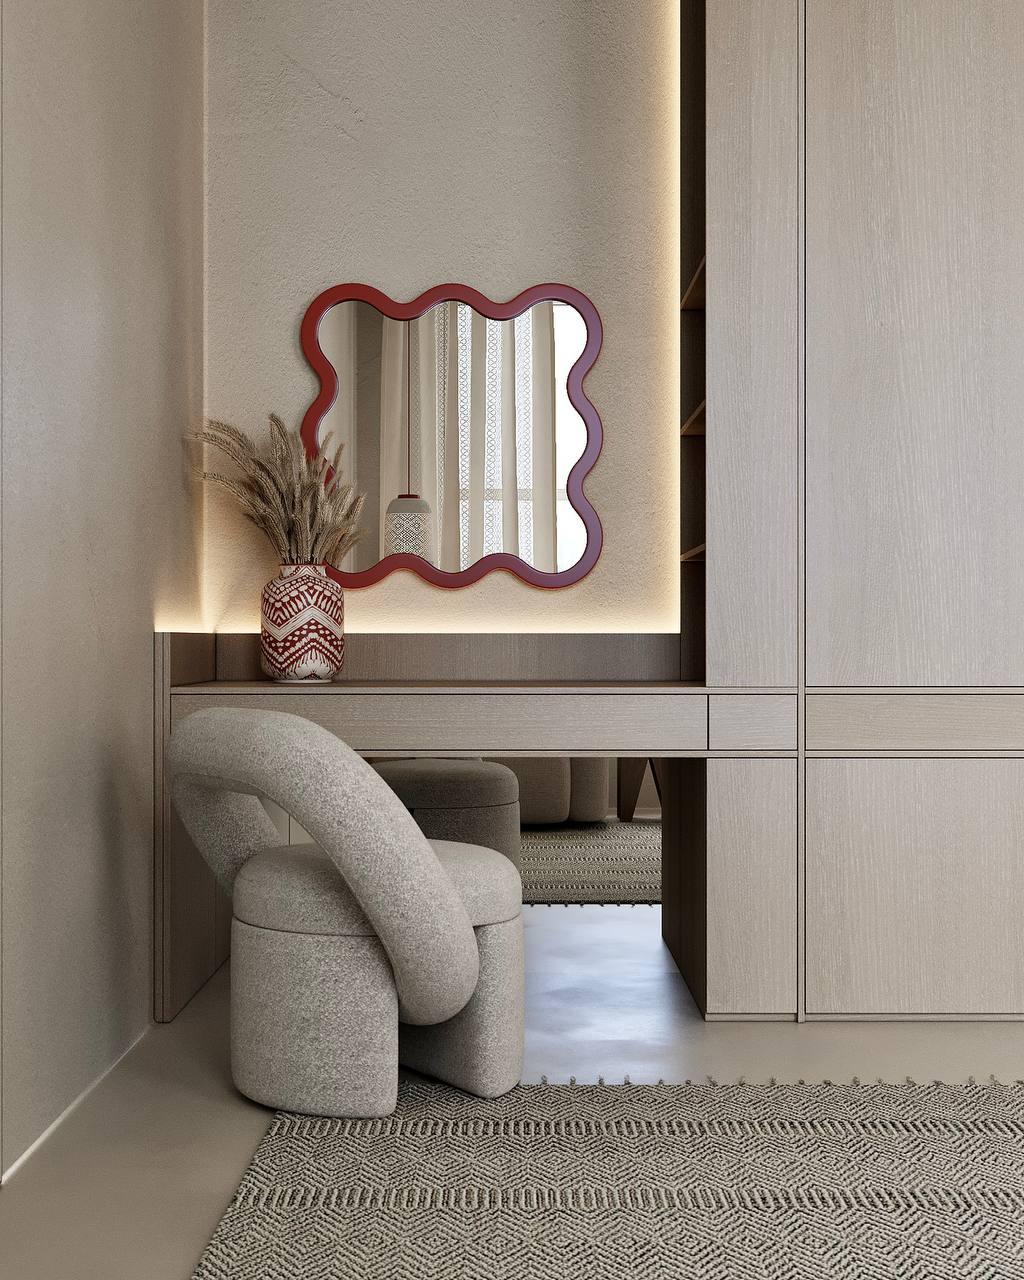 Ukrainian Contemporary Wall Mirror 'Hvyli 12 Square' by Oitoproducts, Dark Red Frame For Sale